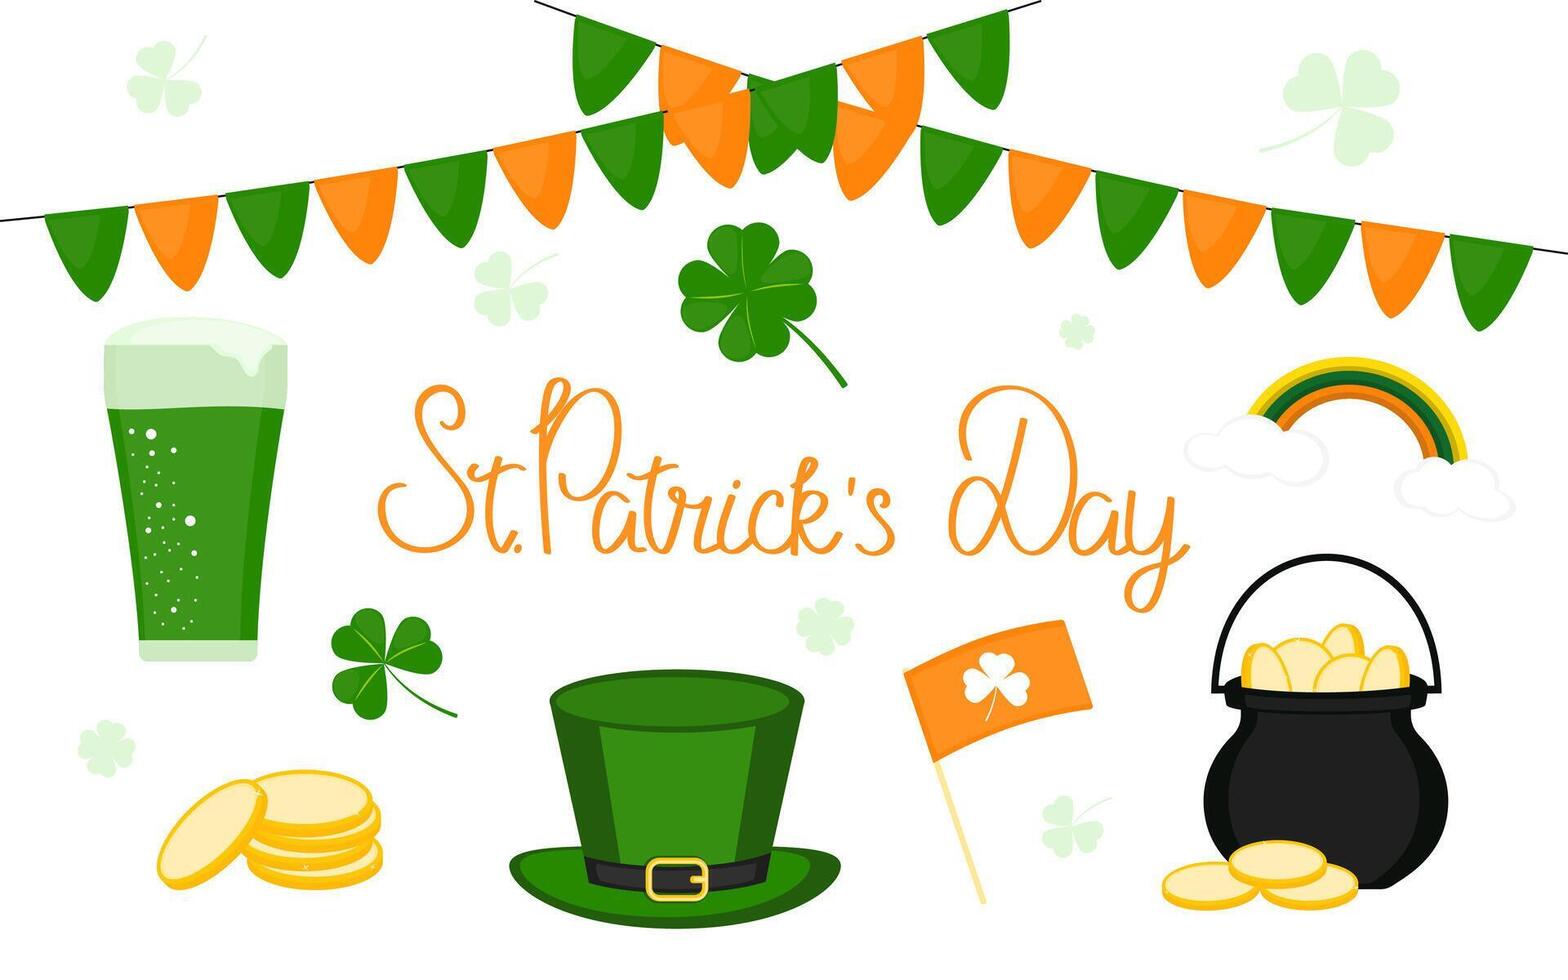 Saint patricks day set of design elements. Clover, shamrock, coins, beer, hat, pot, flags. Collection for cards, scrapbooking, stickers, banner, poster. vector